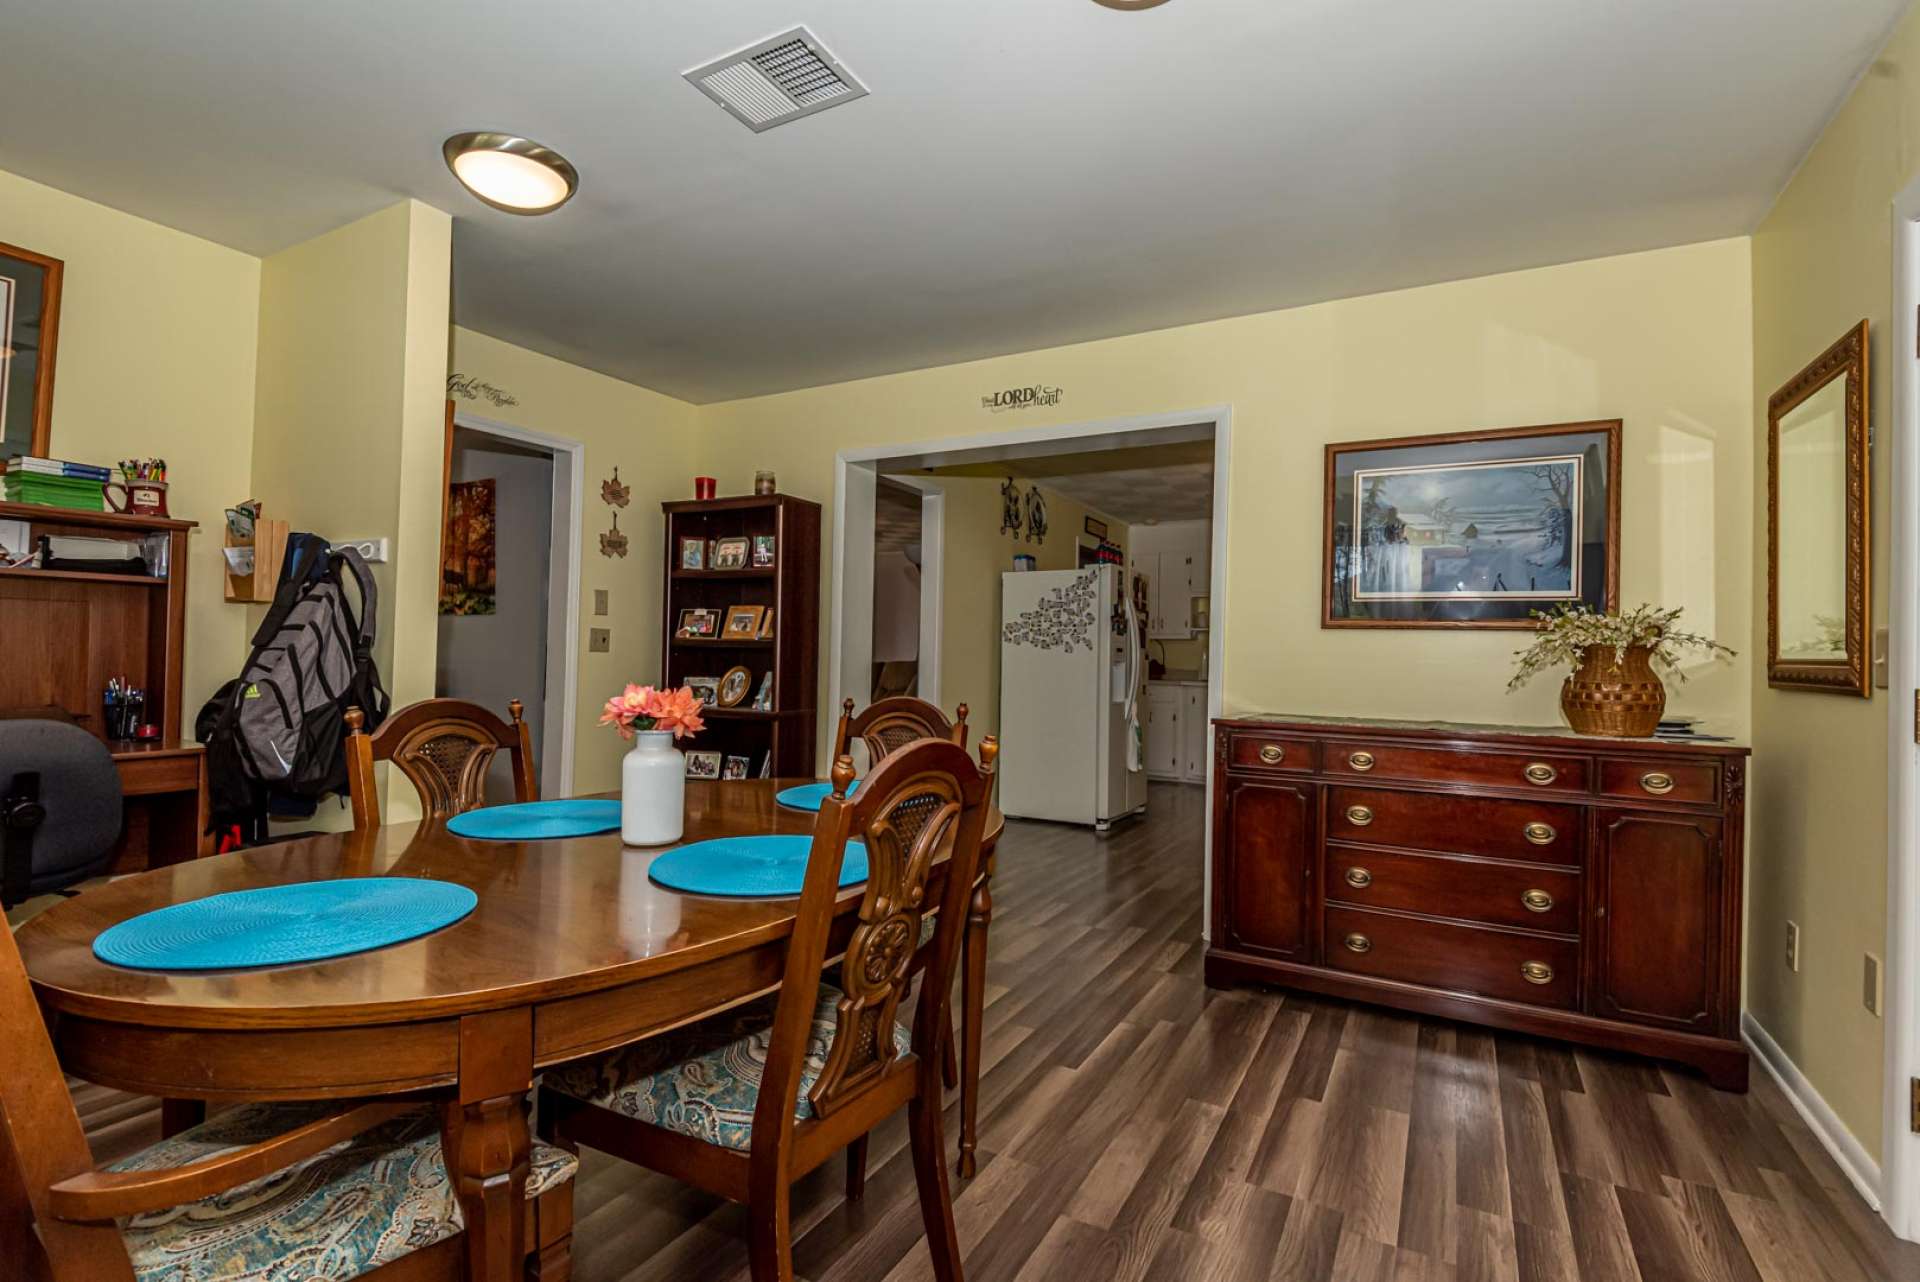 The dining area is easily accessed from the kitchen and living areas.